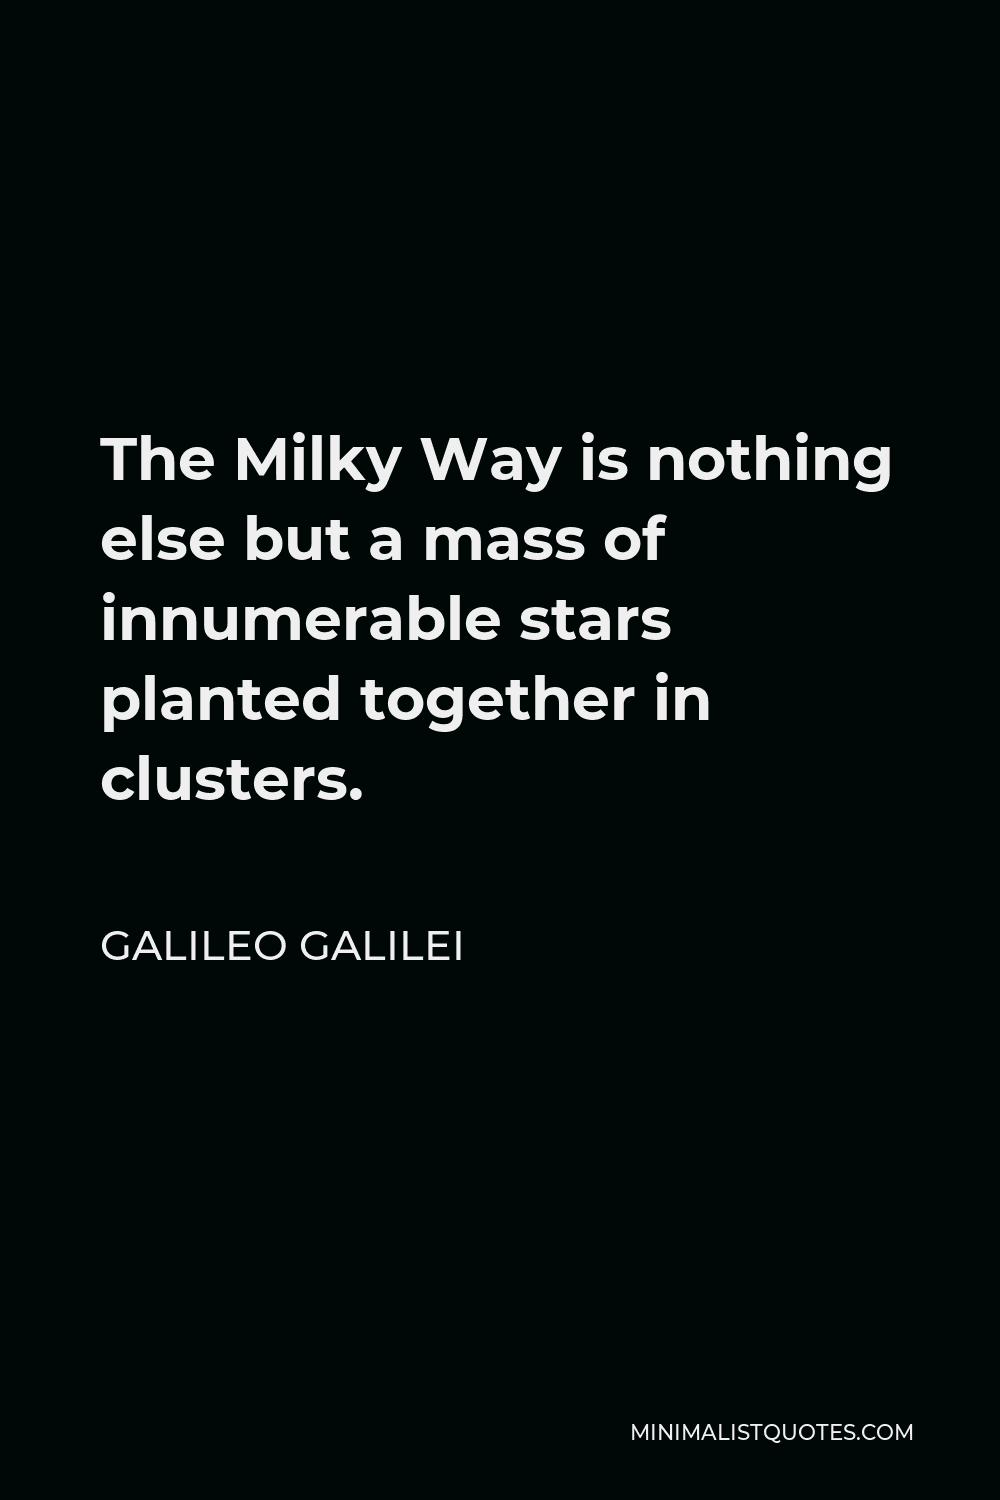 Galileo Galilei Quote - The Milky Way is nothing else but a mass of innumerable stars planted together in clusters.